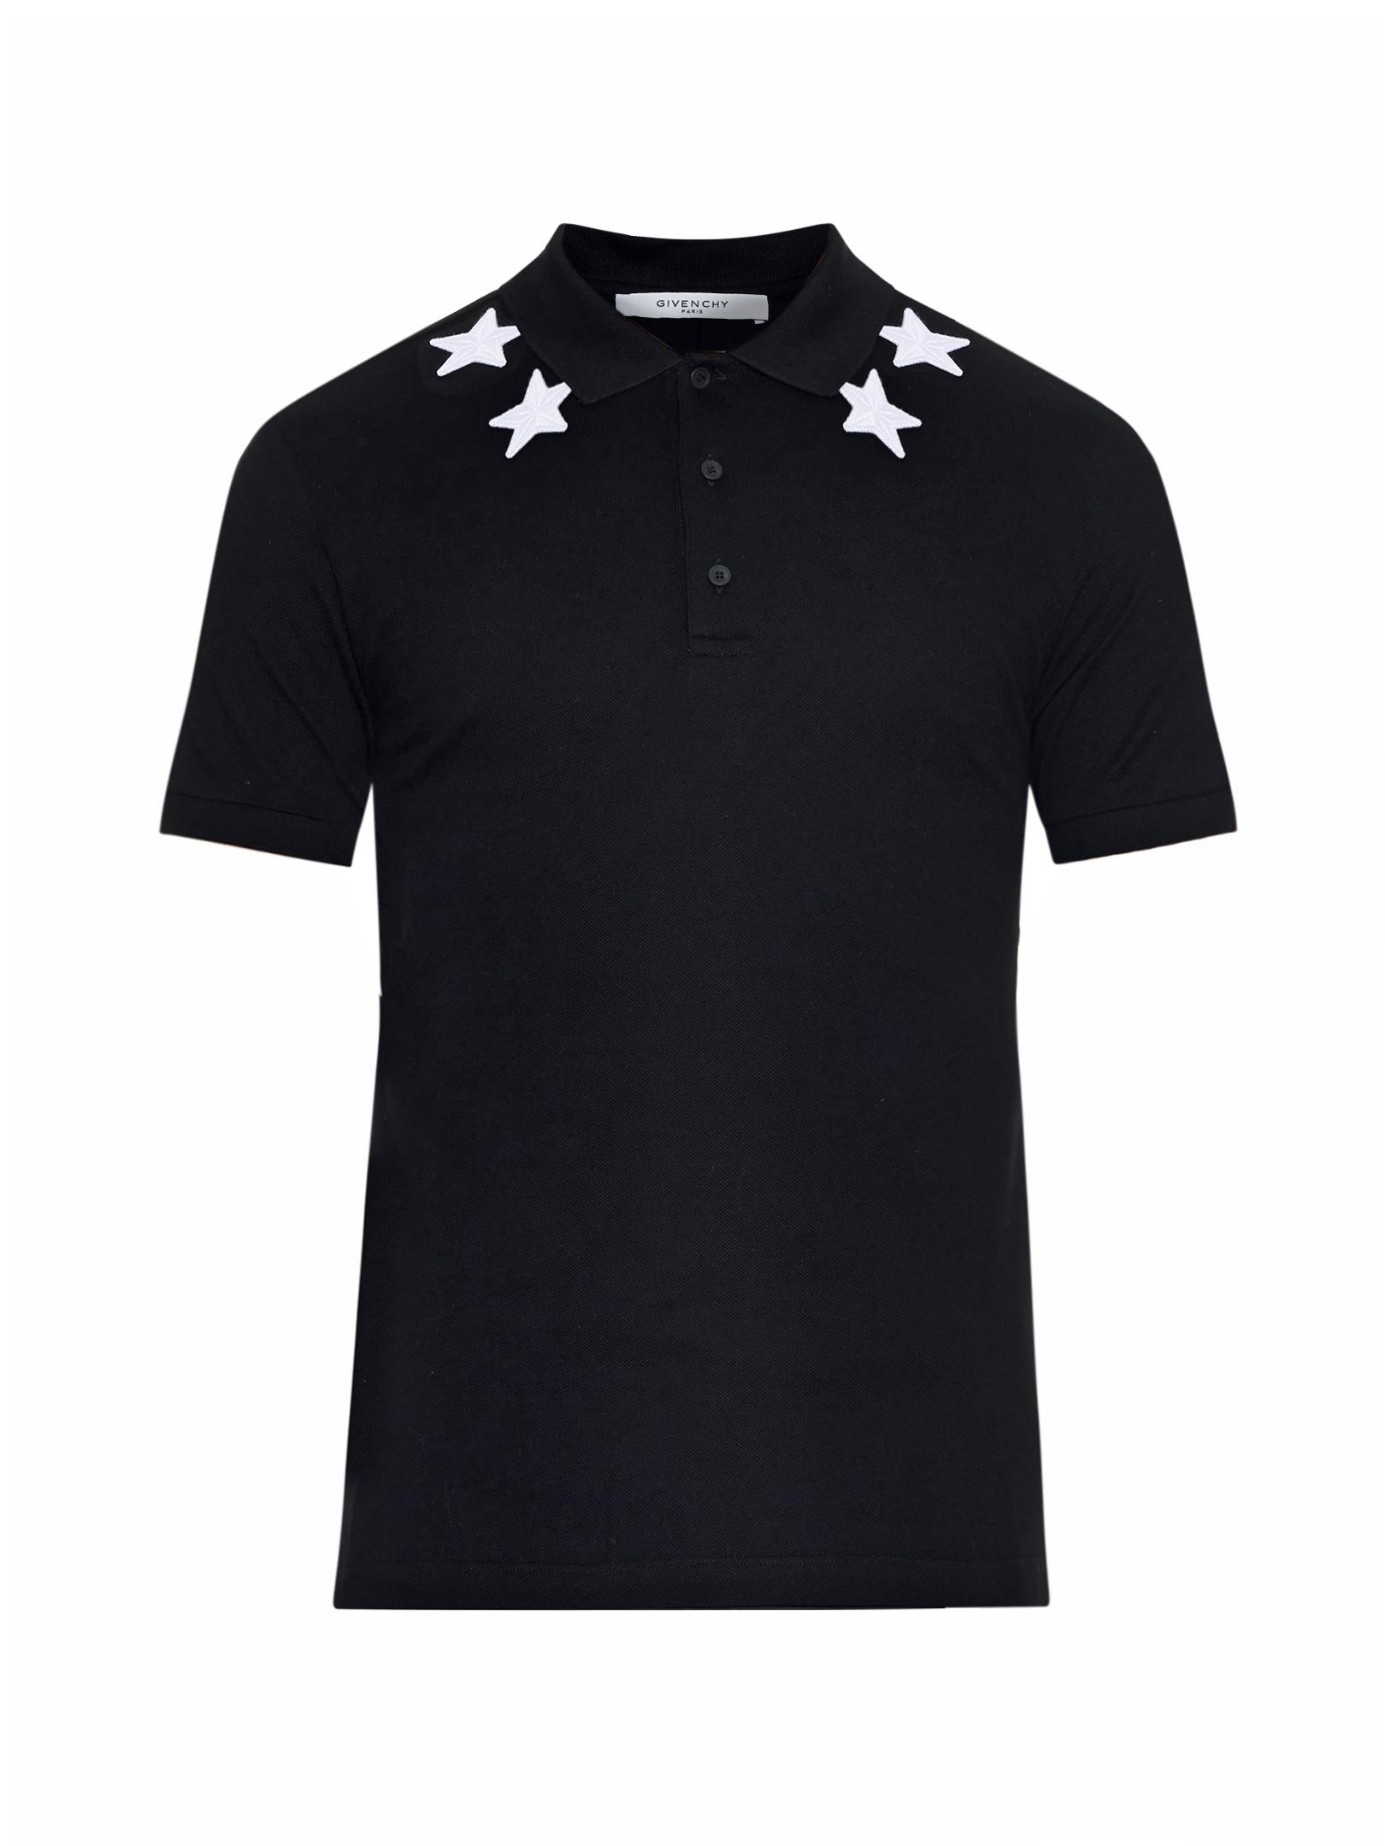 Givenchy Cuban-fit Embroidered-stars Polo Shirt in Black for Men - Lyst